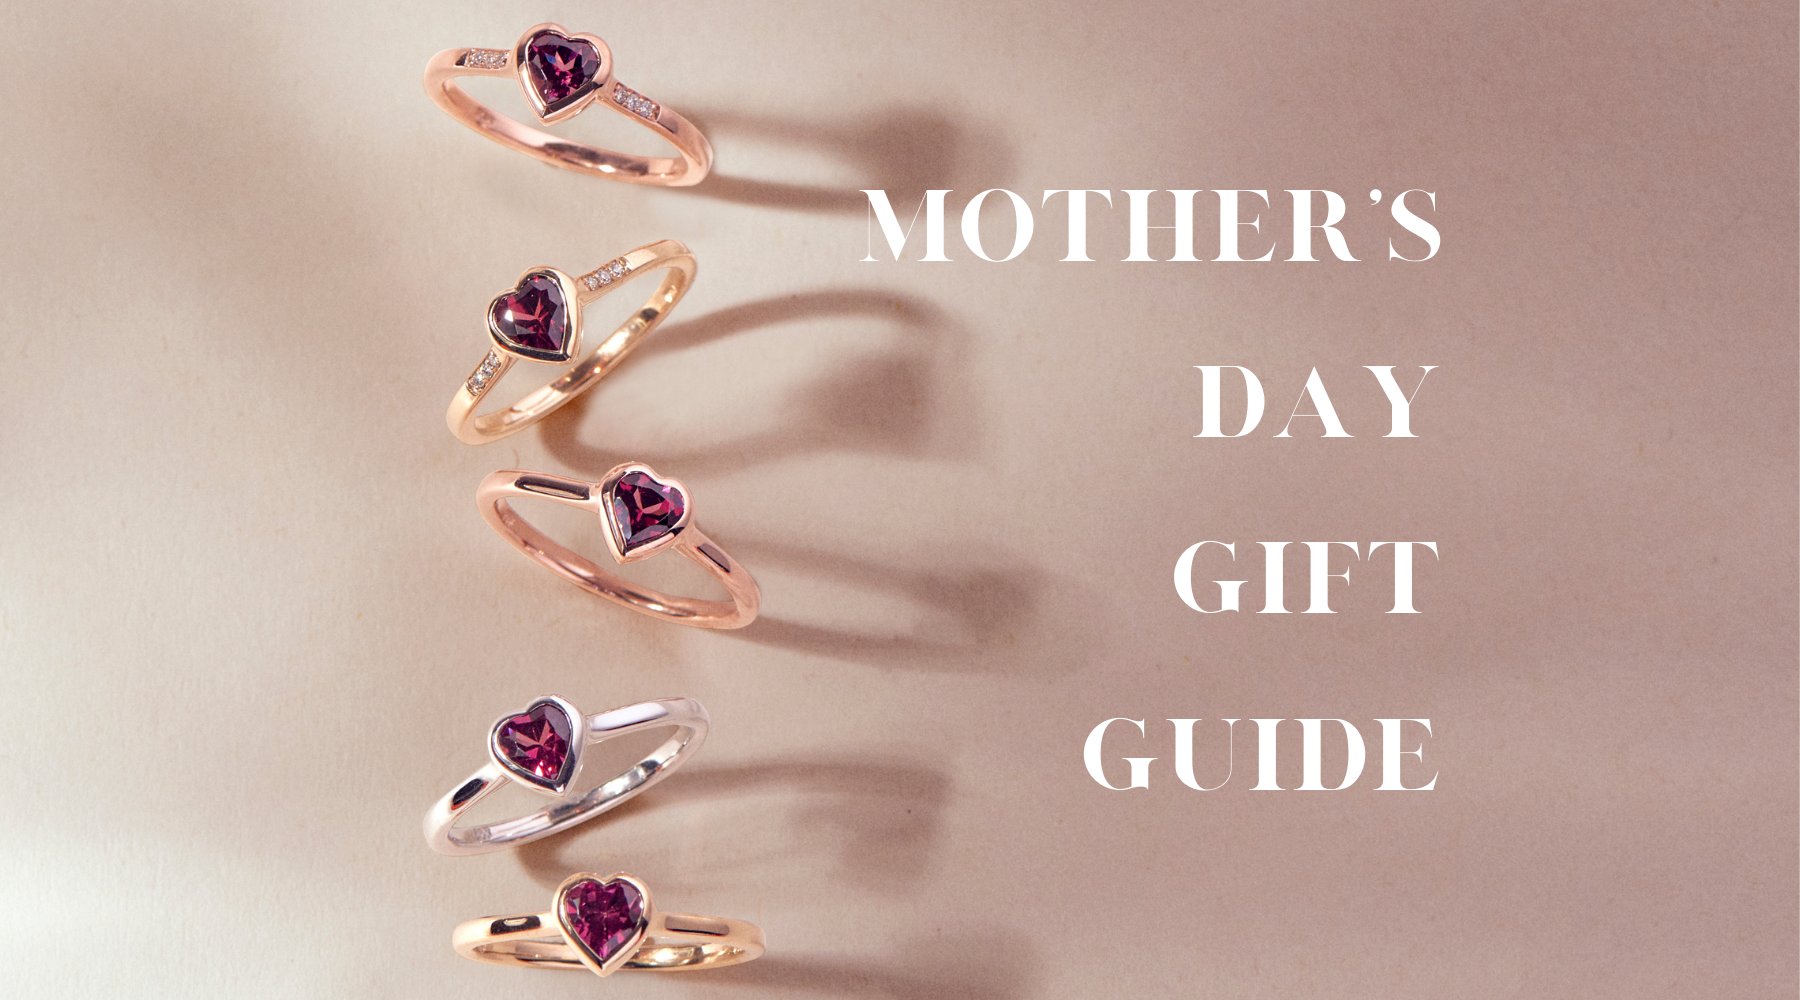 Meaningful Jewelry Gifts for Mum